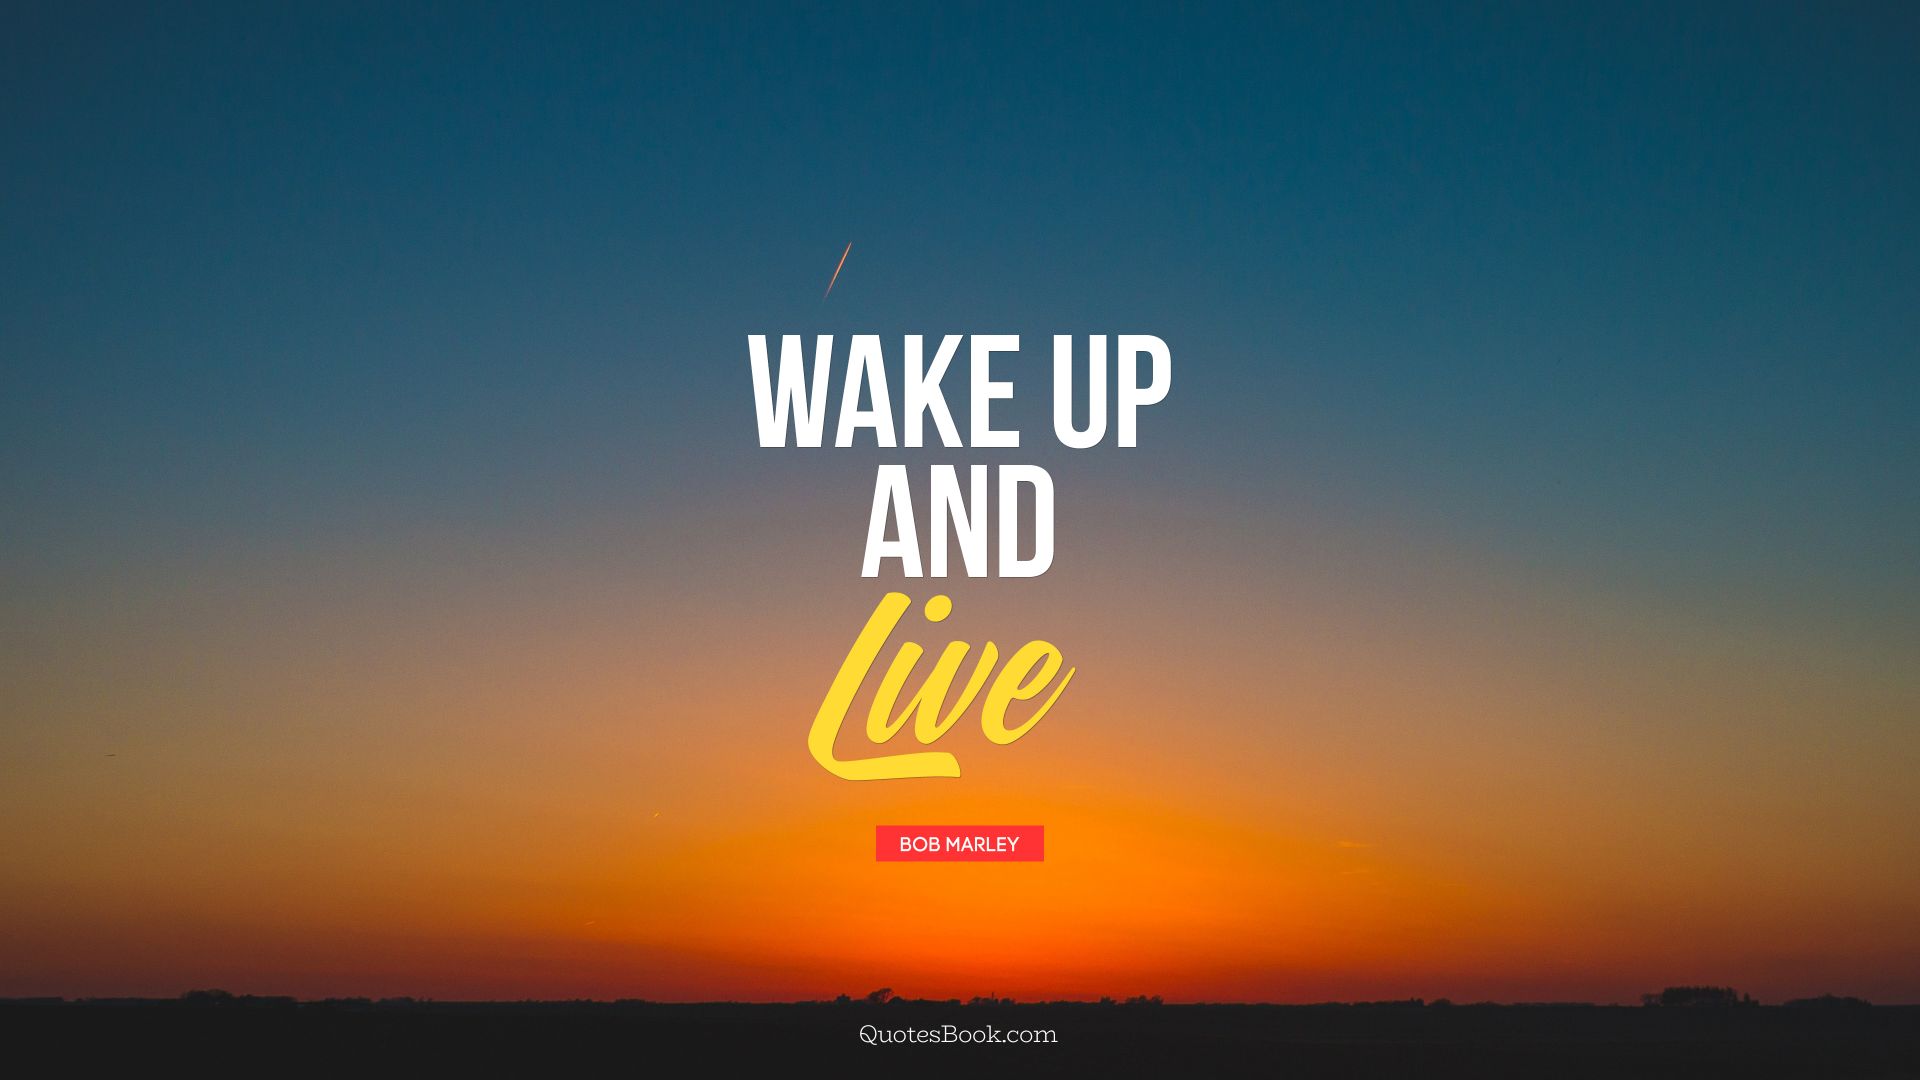 Wake Up and Live. - Quote by Bob Marley